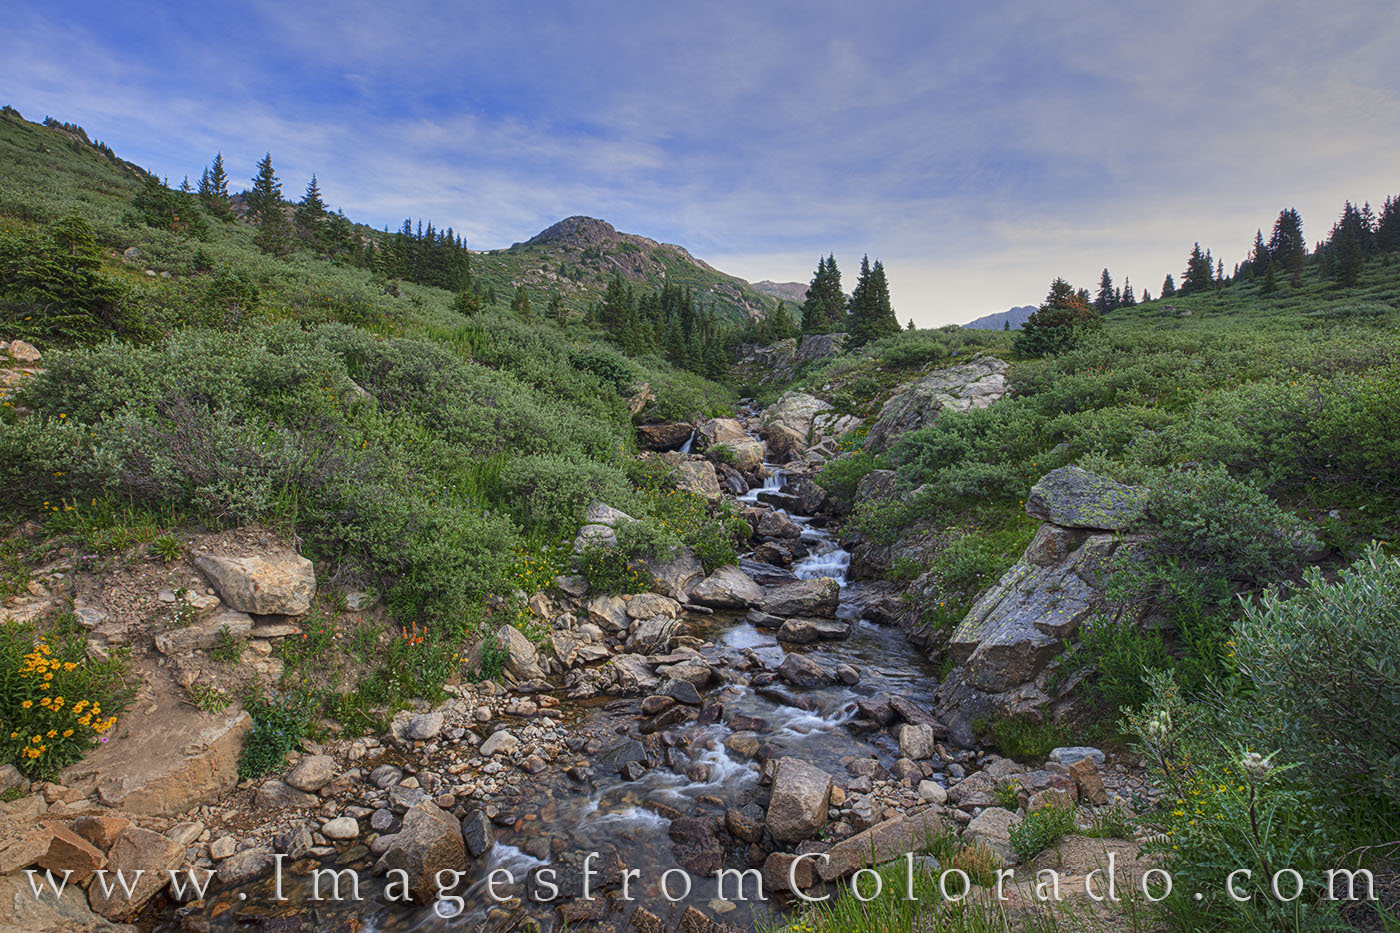 Just west of Aspen, Colorado, along Highway 82, this little stream flows down from high up in the mountains. Found at the start...